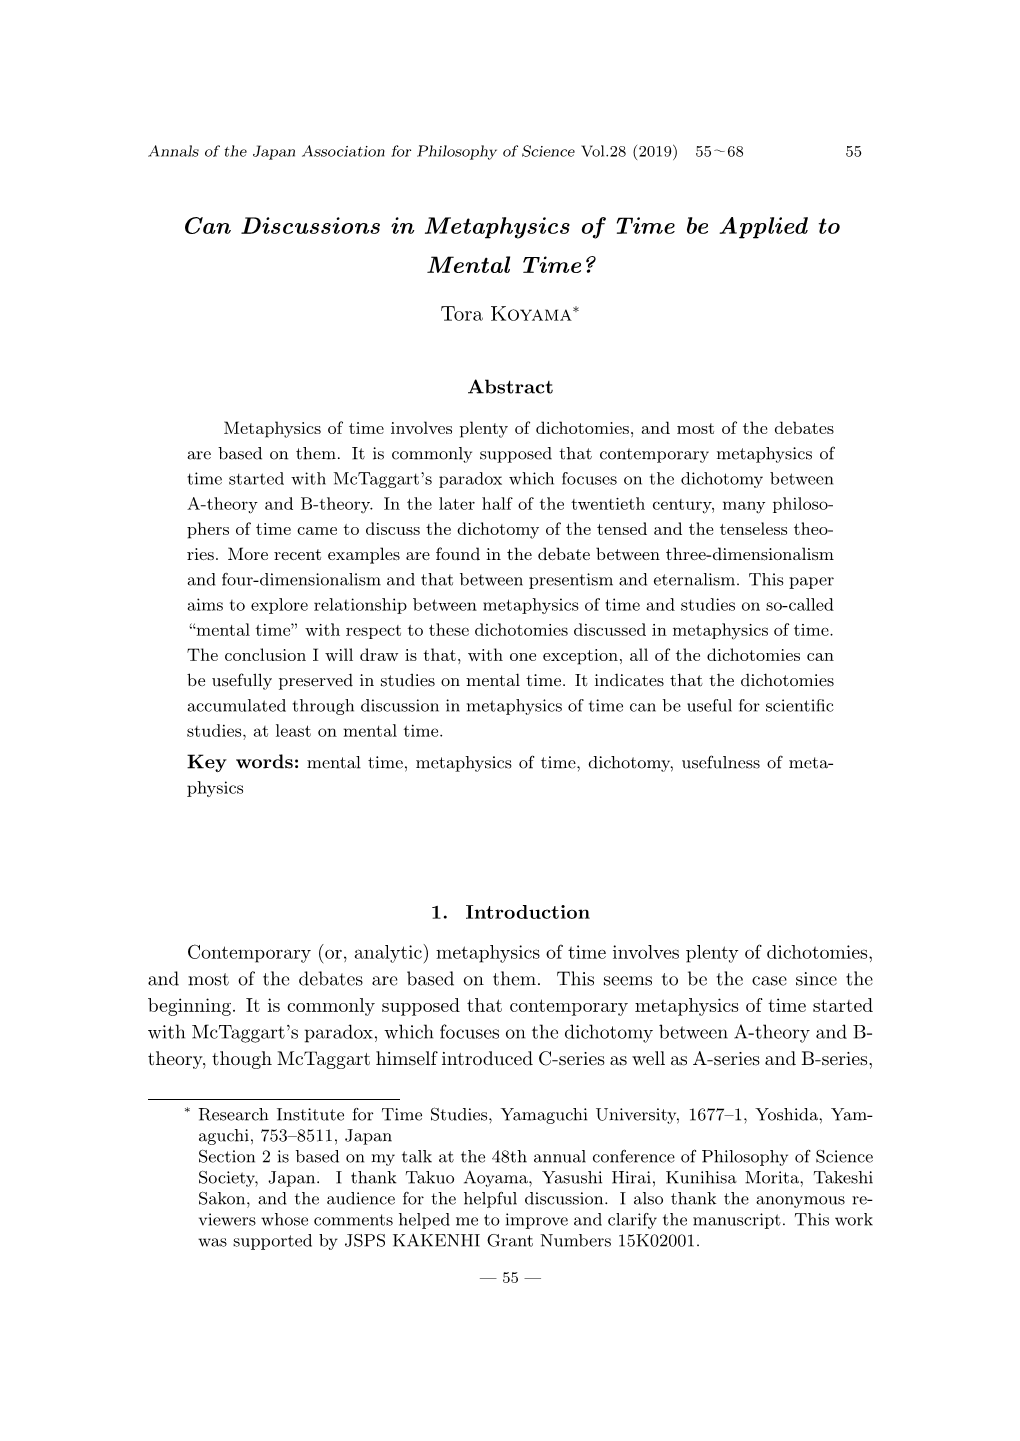 Can Discussions in Metaphysics of Time Be Applied to Mental Time?